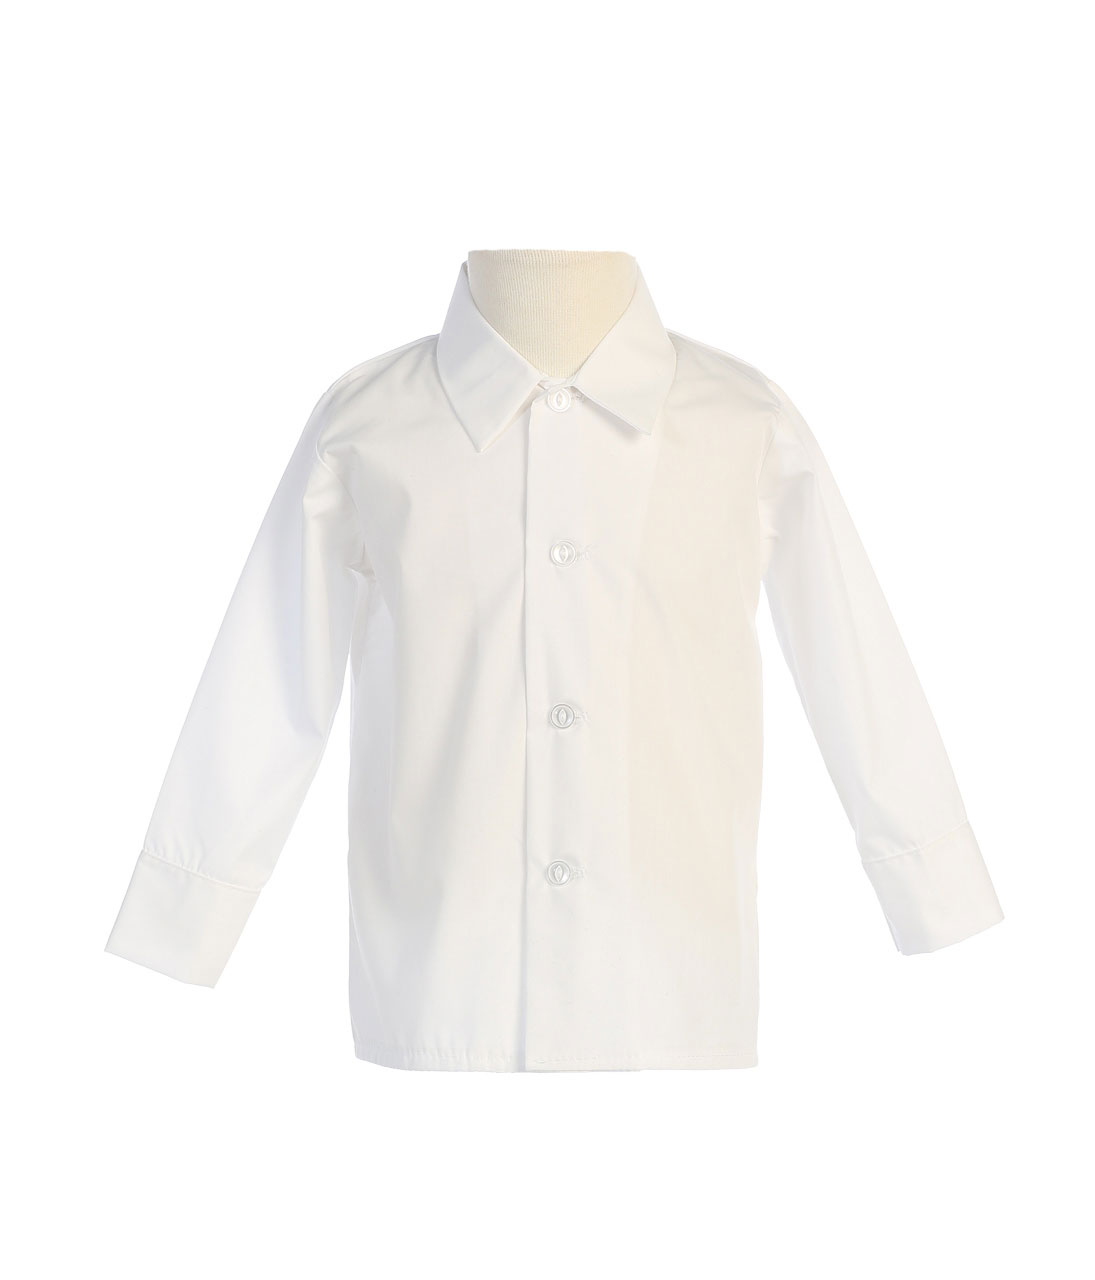 Boys Long Sleeved Simple Dress Shirt - Available in White 2T